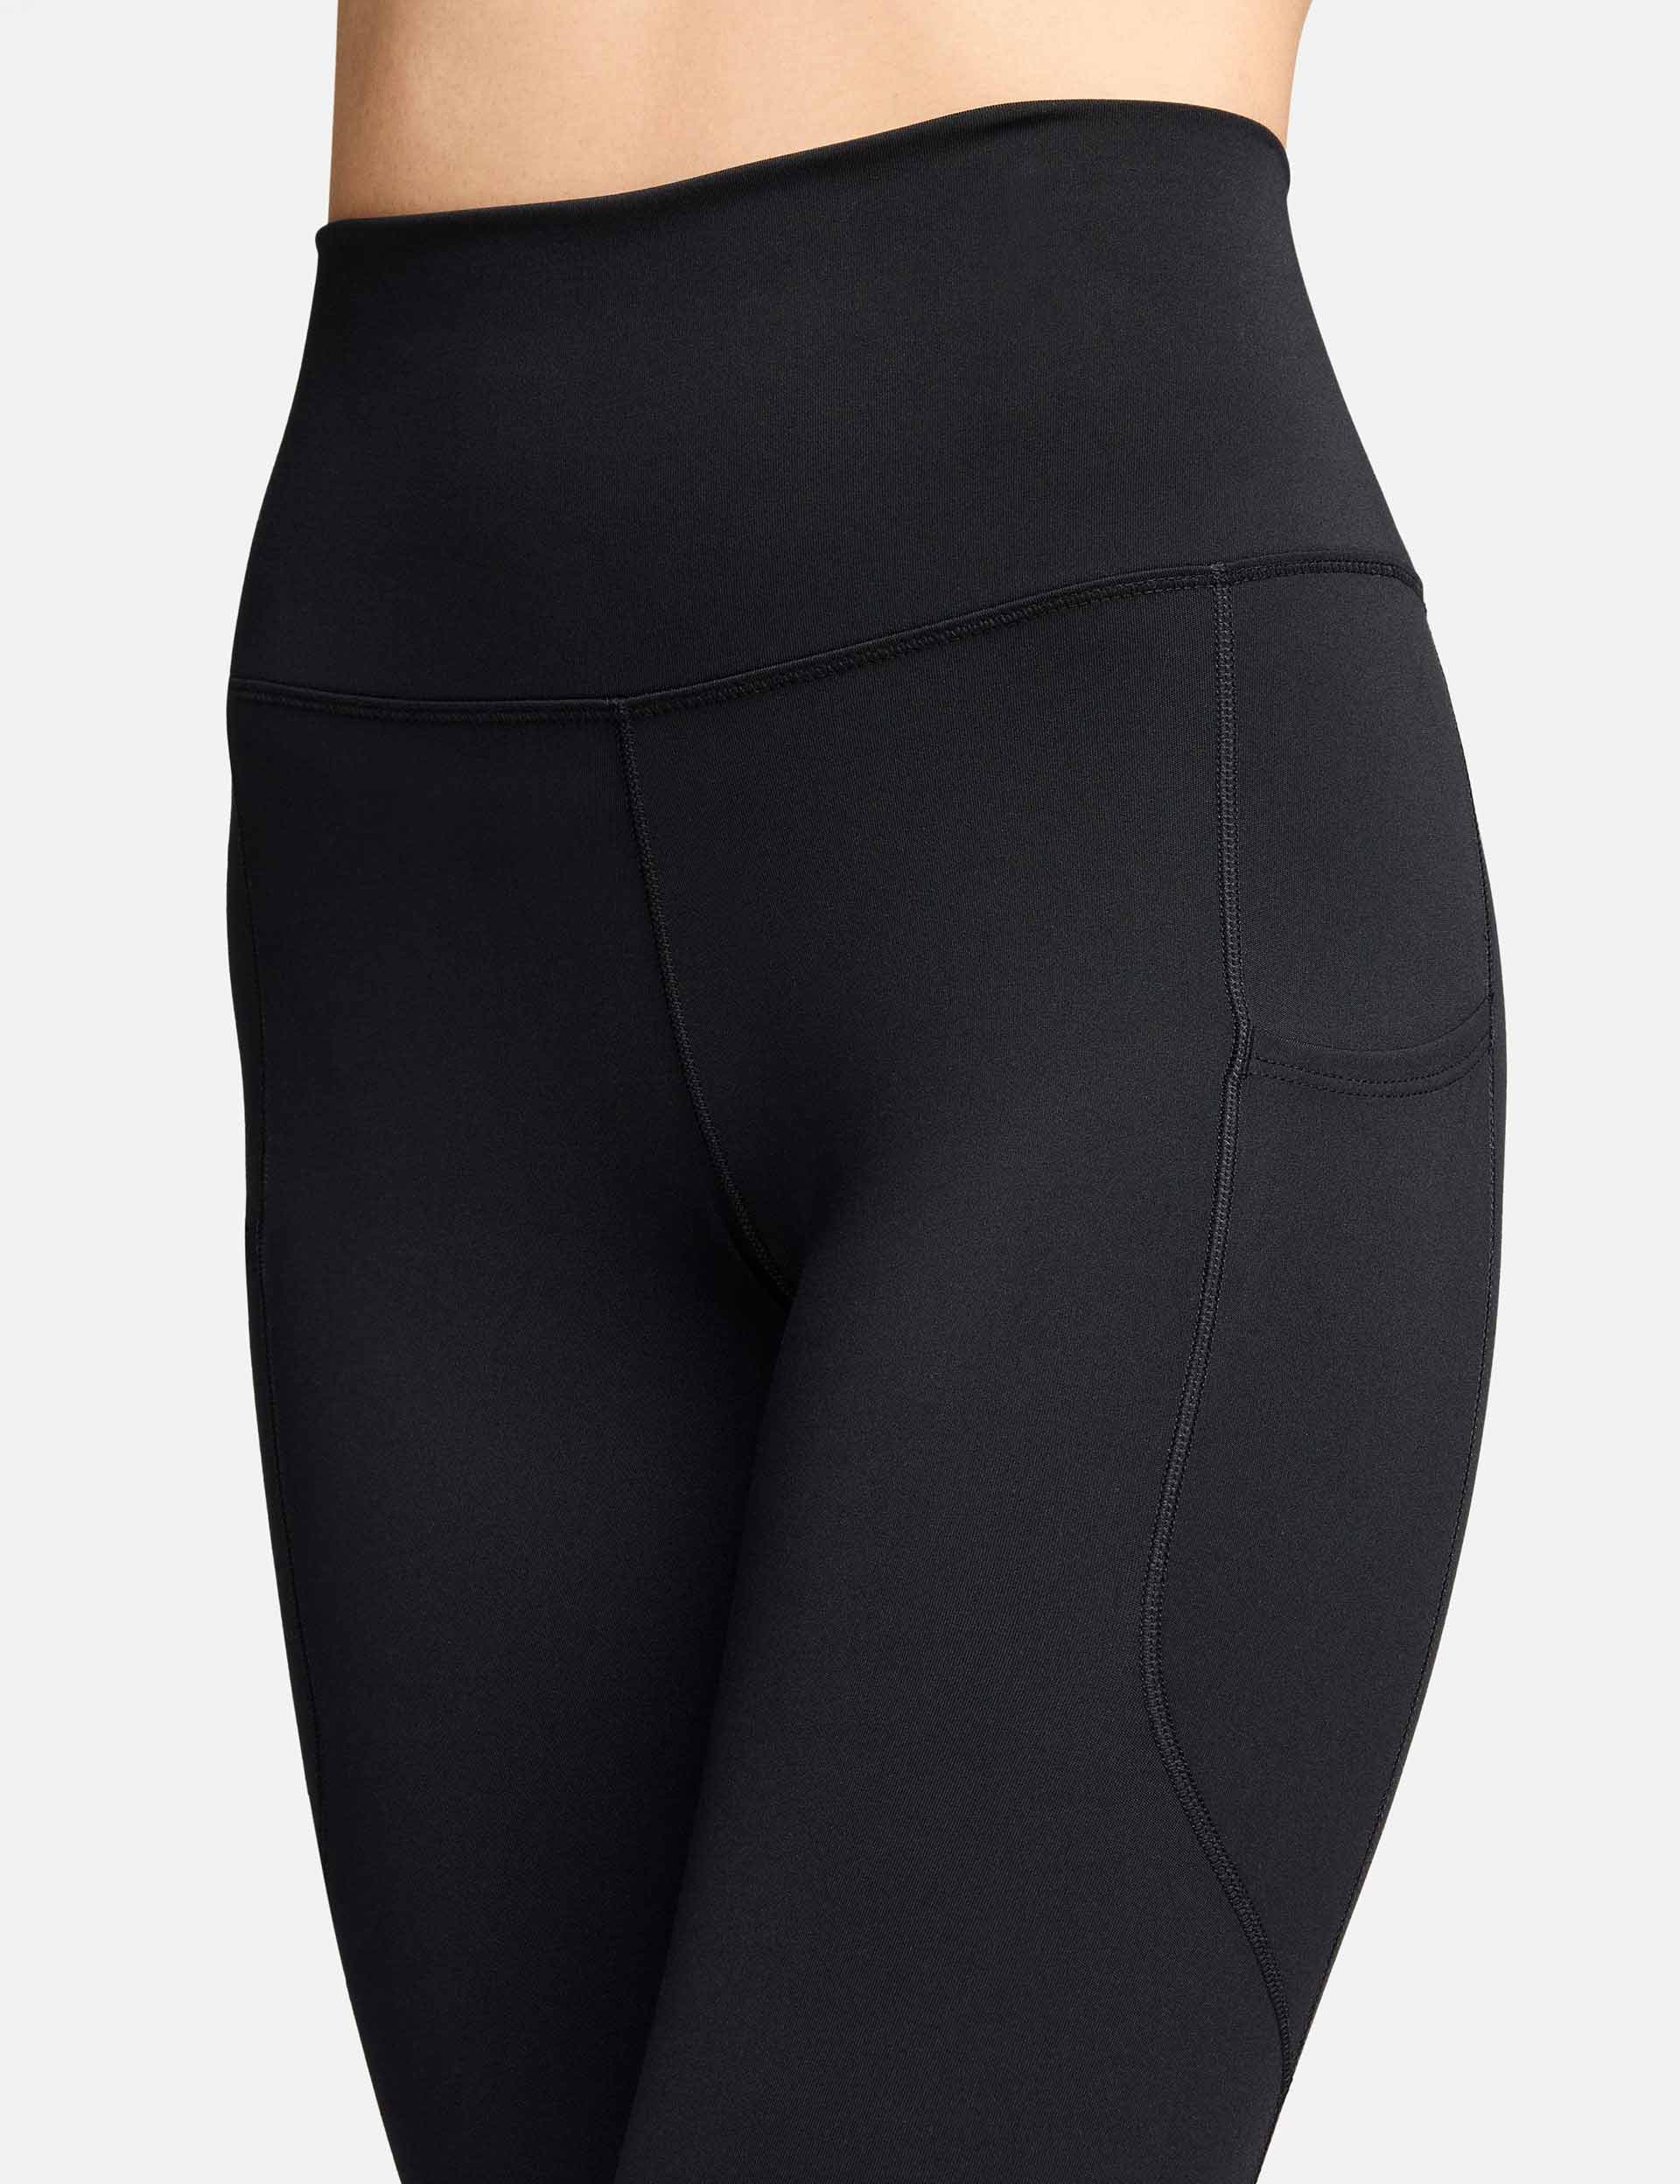 Nike Women's One High-Waisted 7/8 Leggings with Pockets